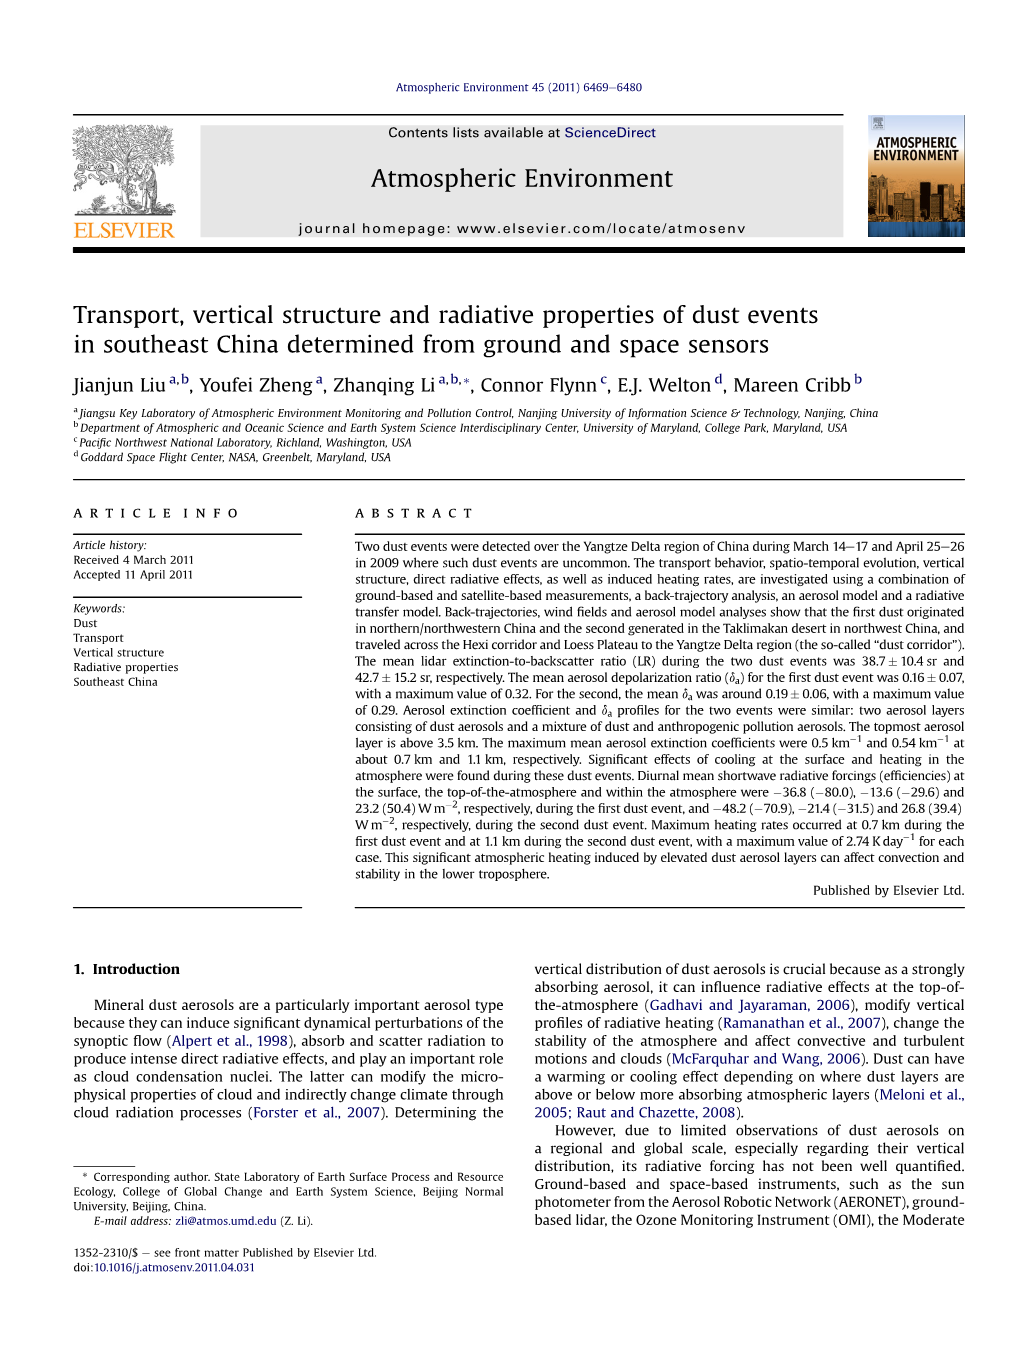 Transport, Vertical Structure and Radiative Properties of Dust Events in Southeast China Determined from Ground and Space Sensors